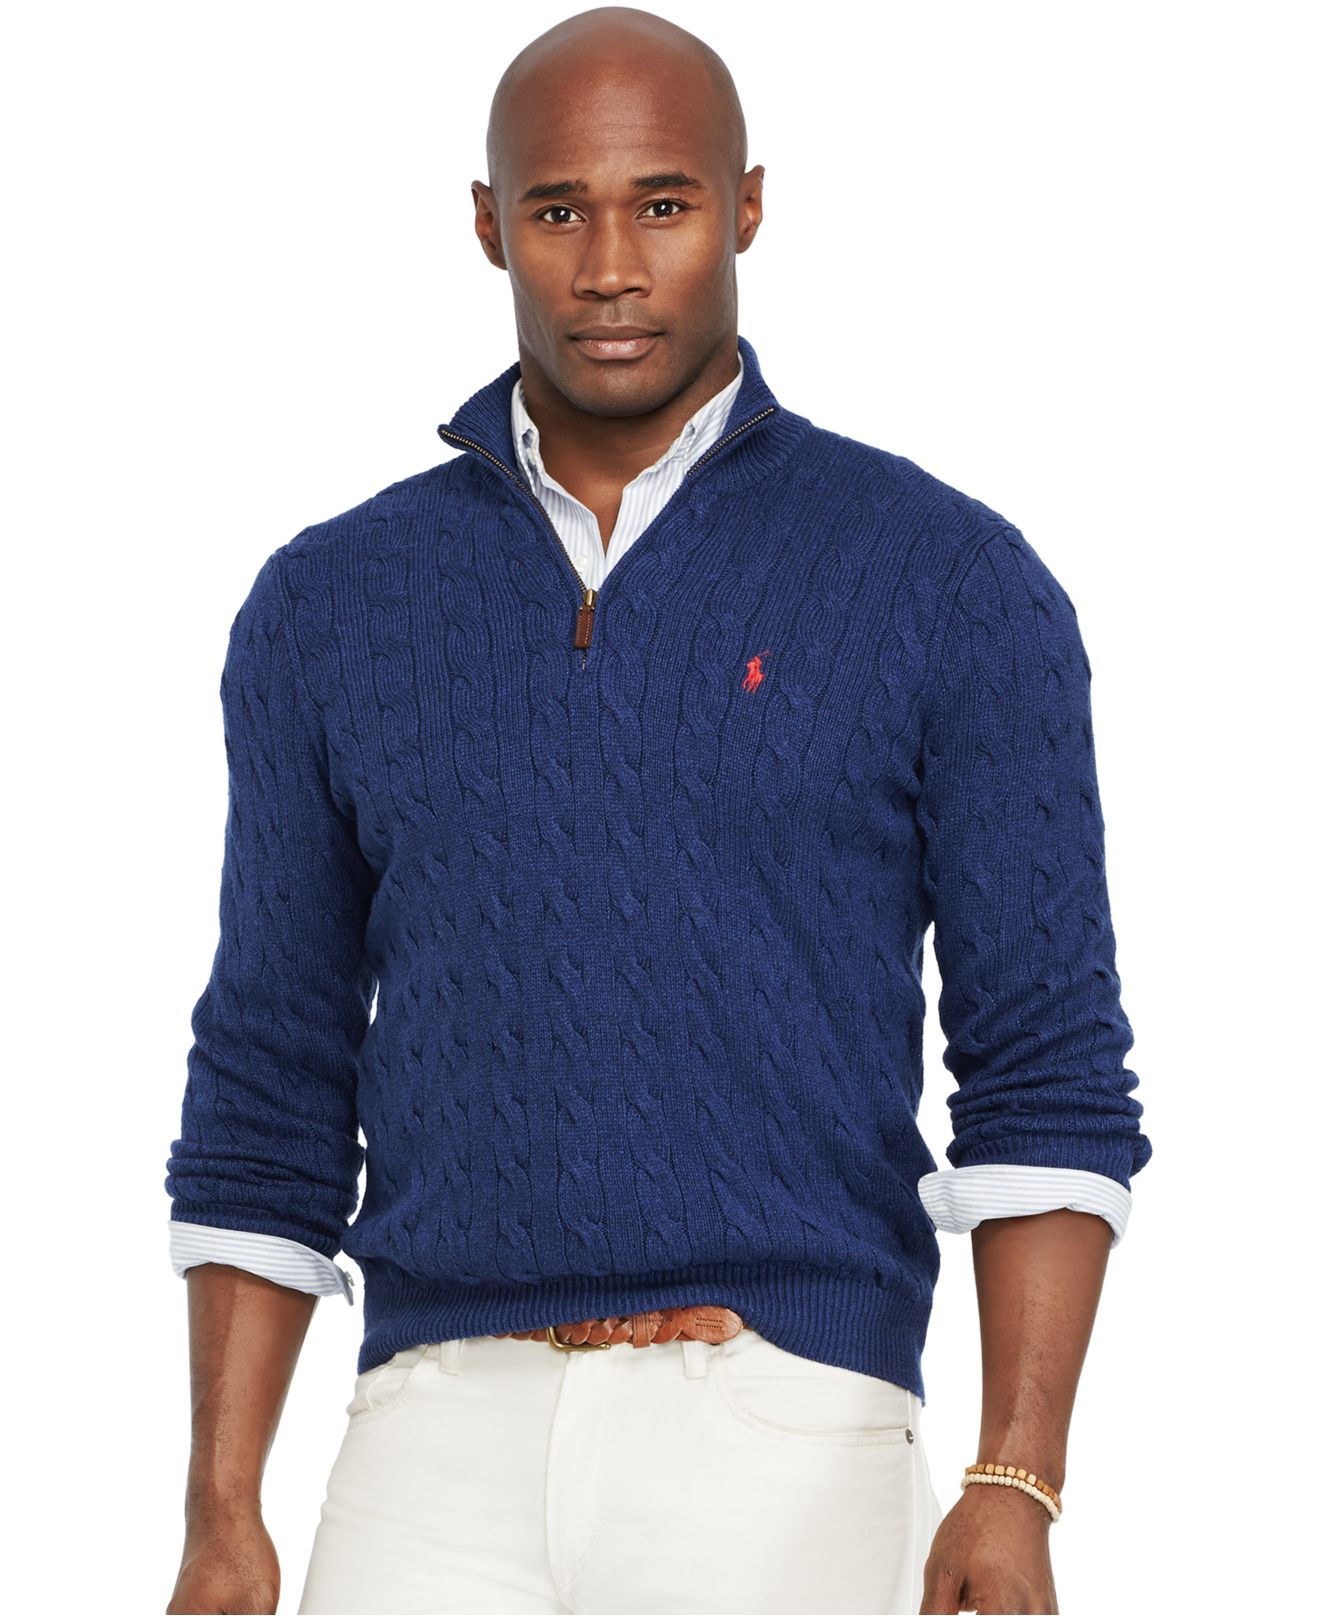 Lyst - Polo ralph lauren Big And Tall Cable-Knit Tussah Silk Sweater in ...